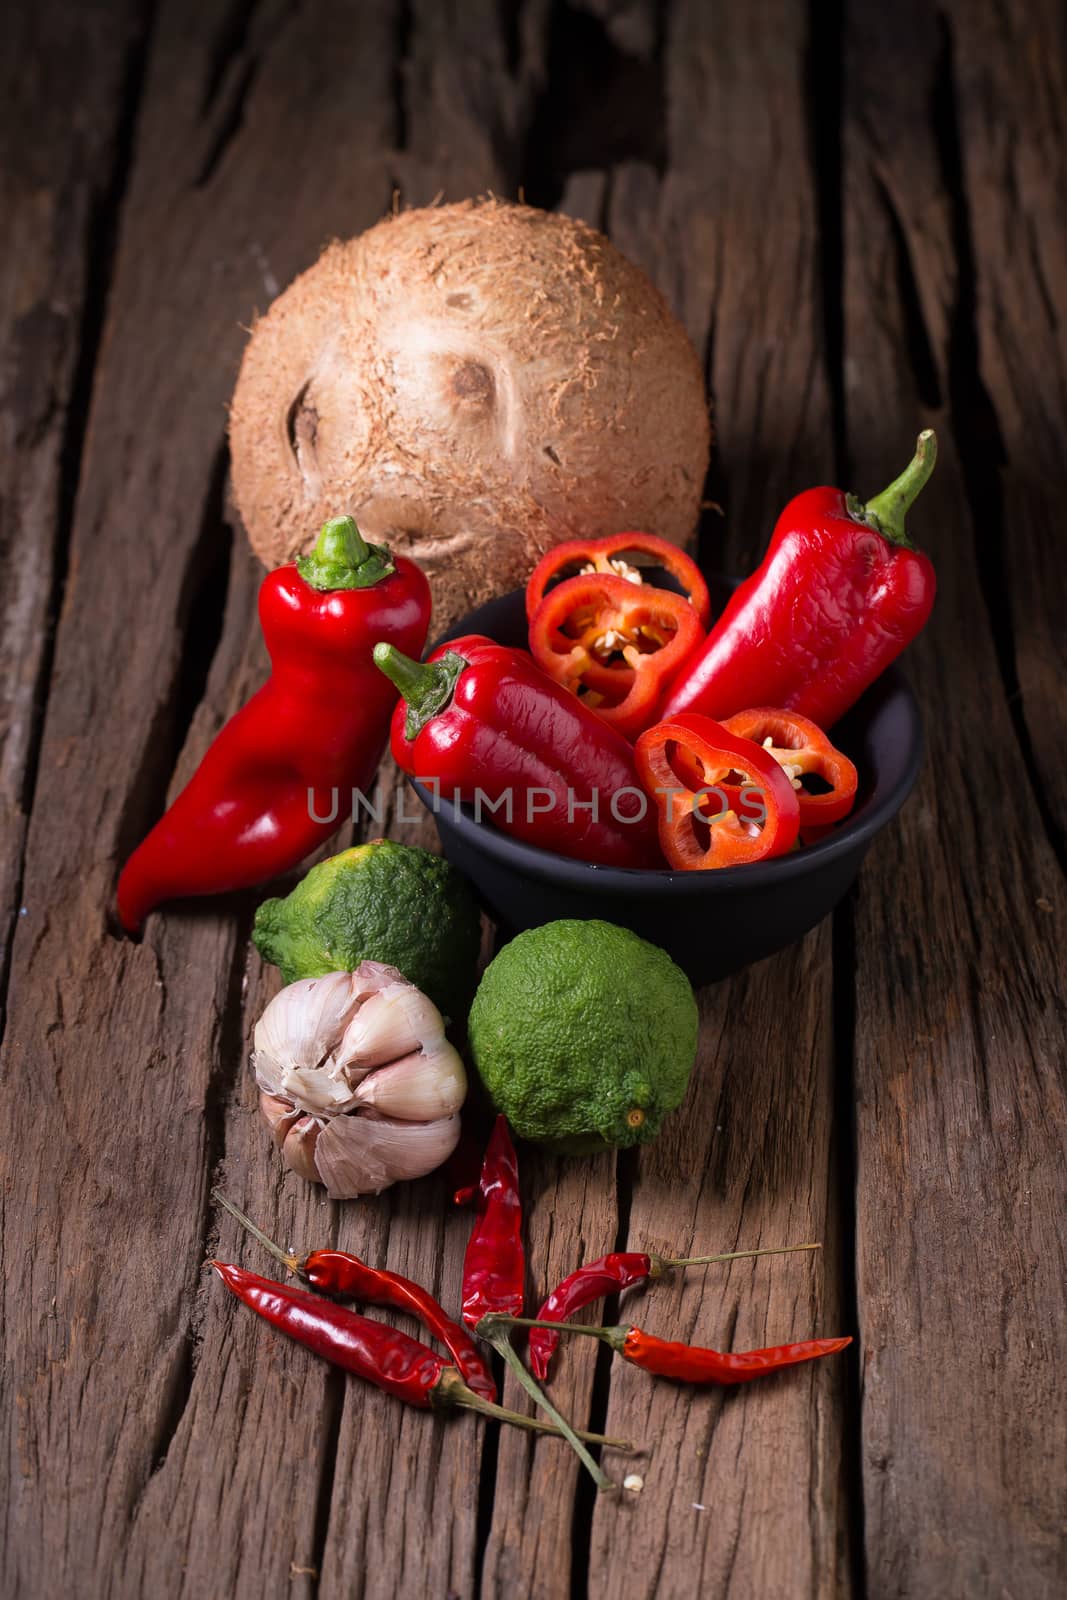 Spices and herbs on wooden background by kaiskynet